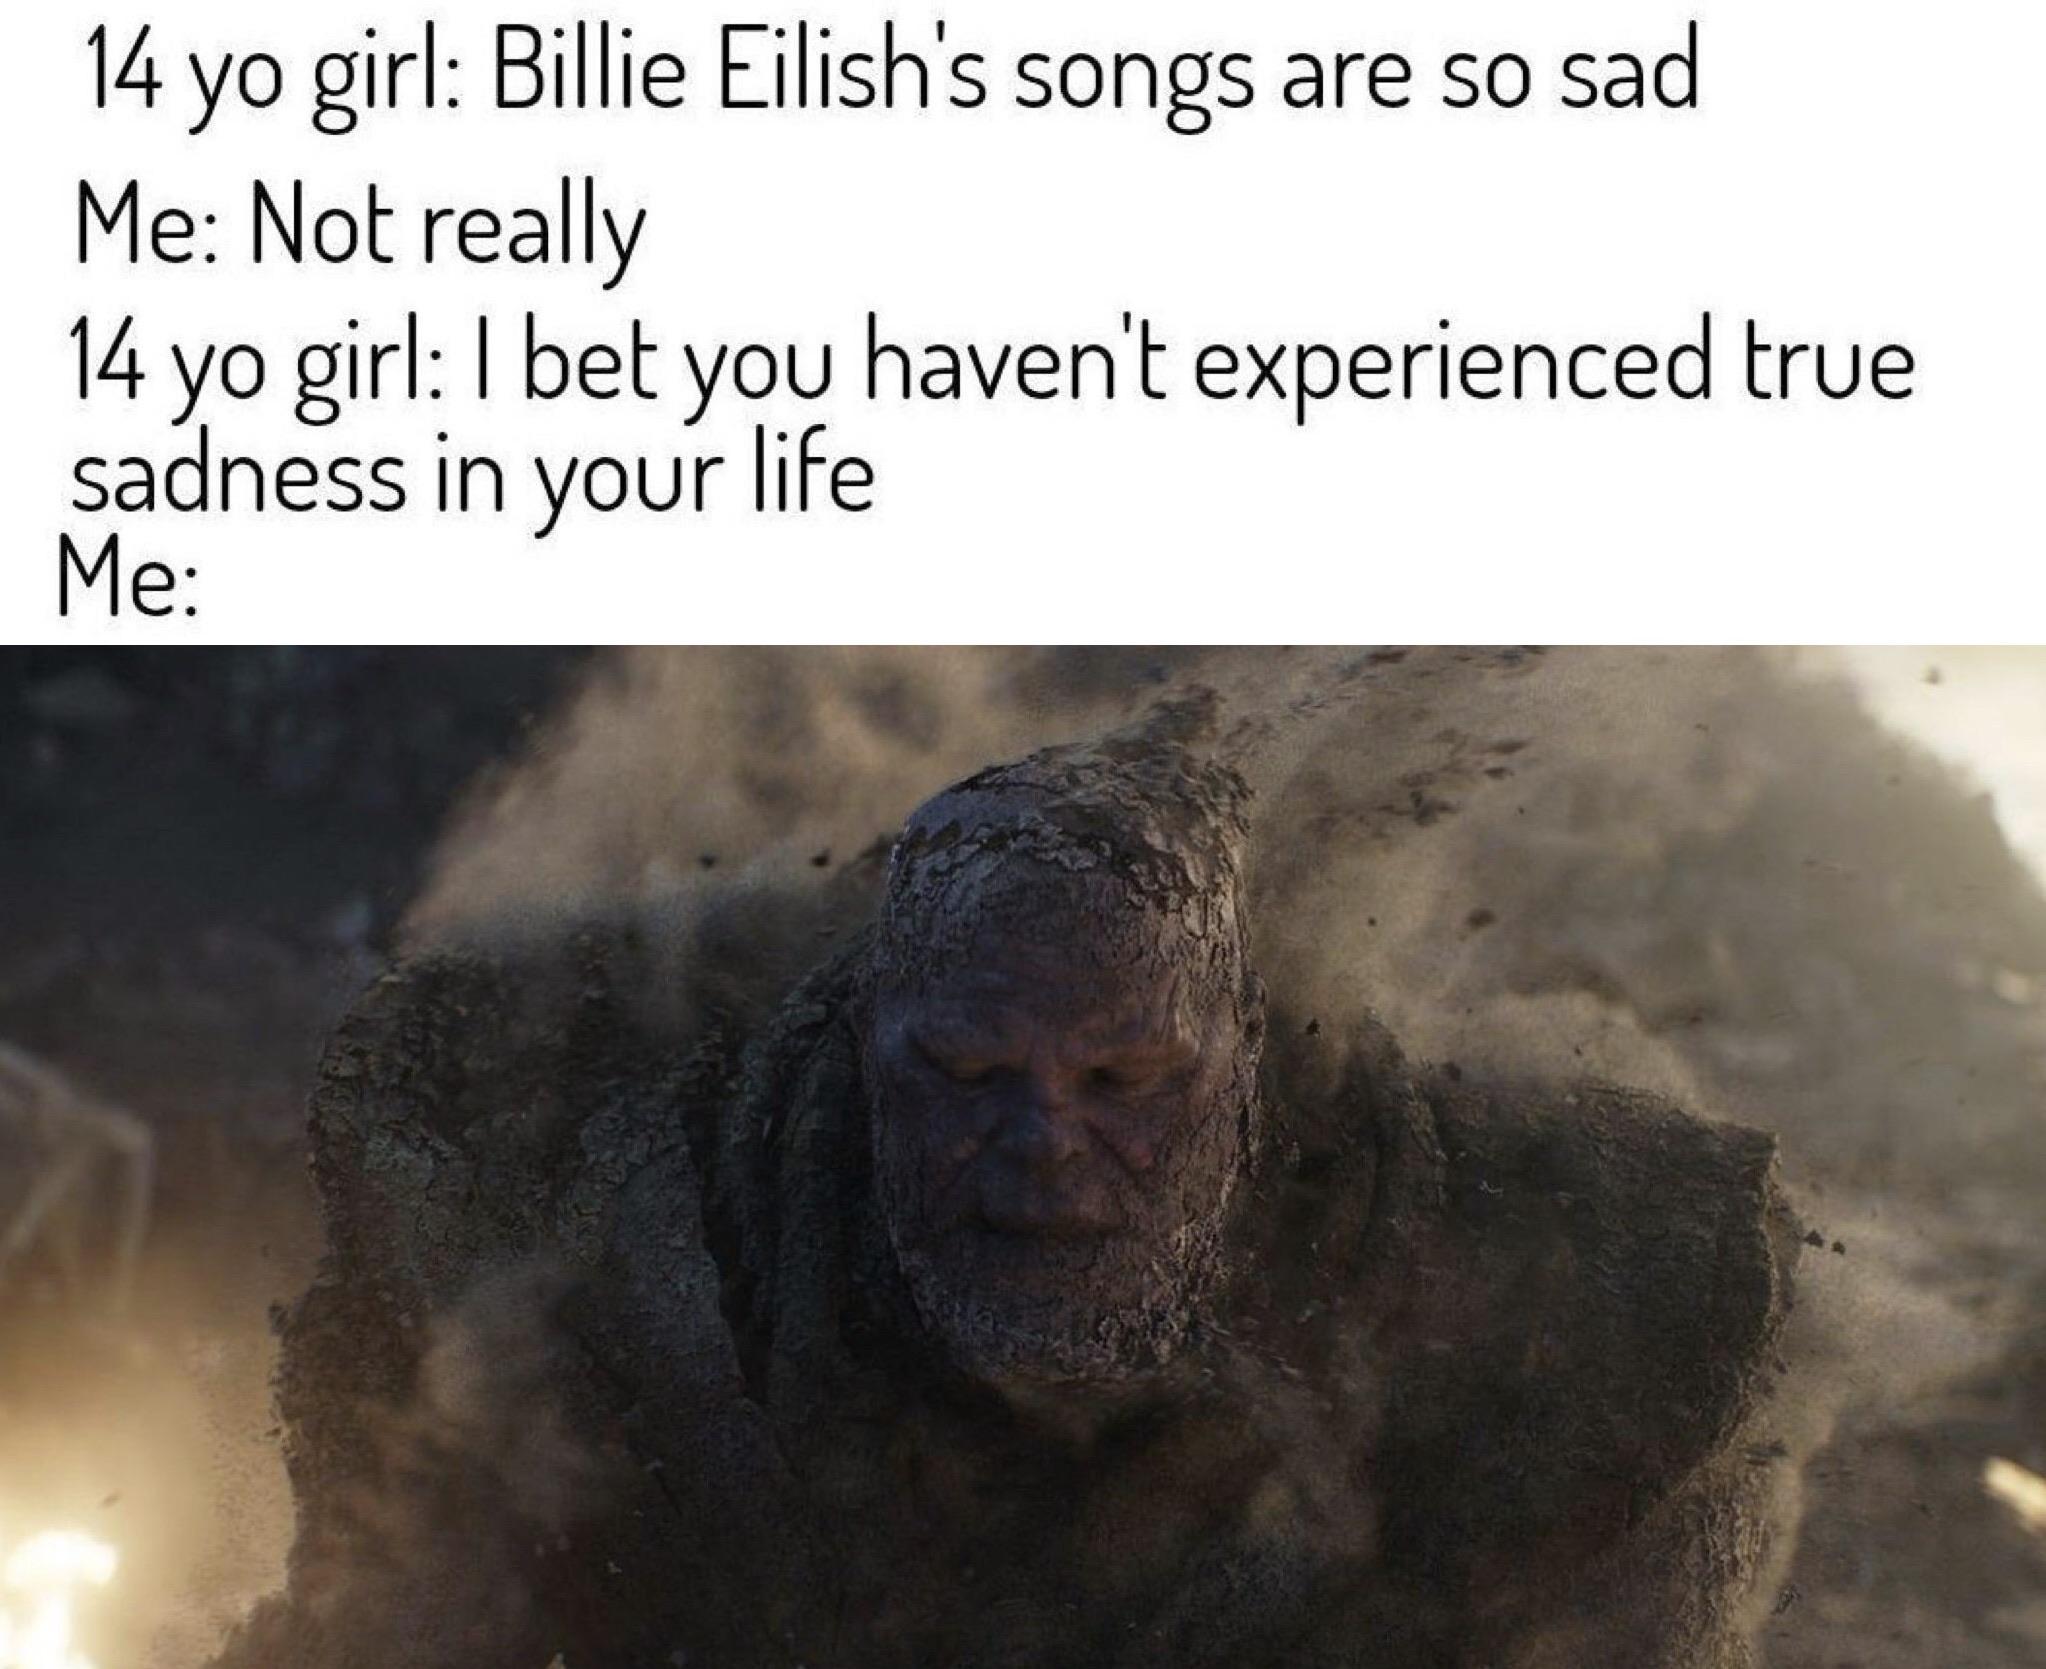 thanos avengers-memes thanos text: 14 yo girl: Billie Eilish's songs are so sad Me: Not really 14 yo girl: I bet you haven't experienced true sadness in your life 